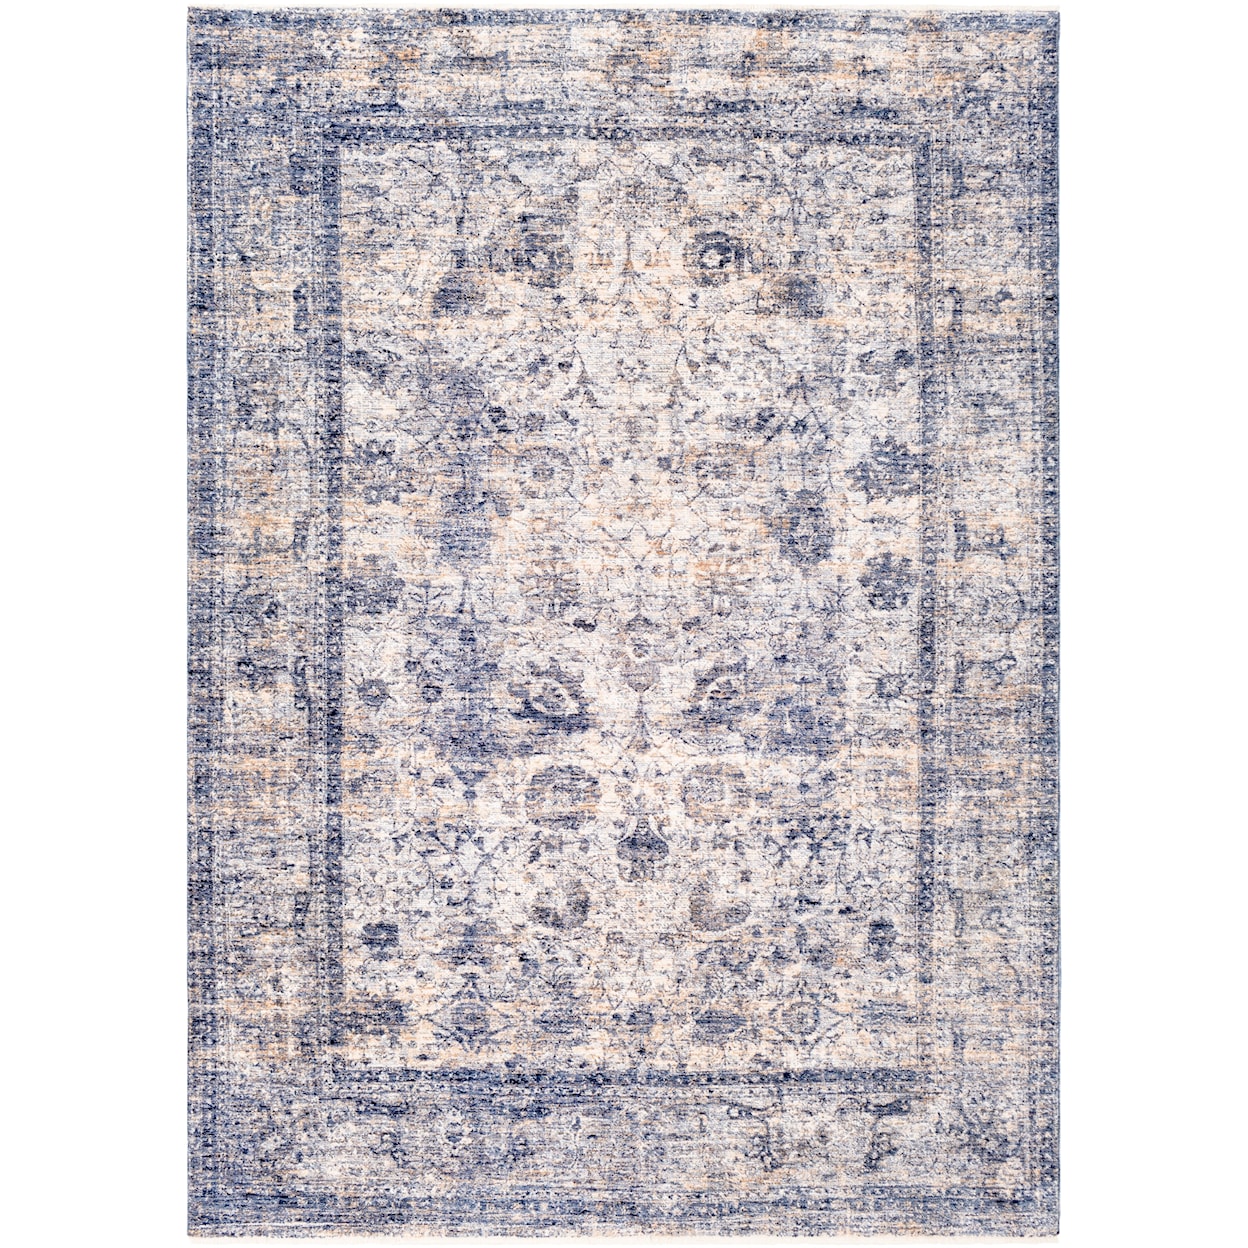 Ruby-Gordon Accents Lincoln Rugs